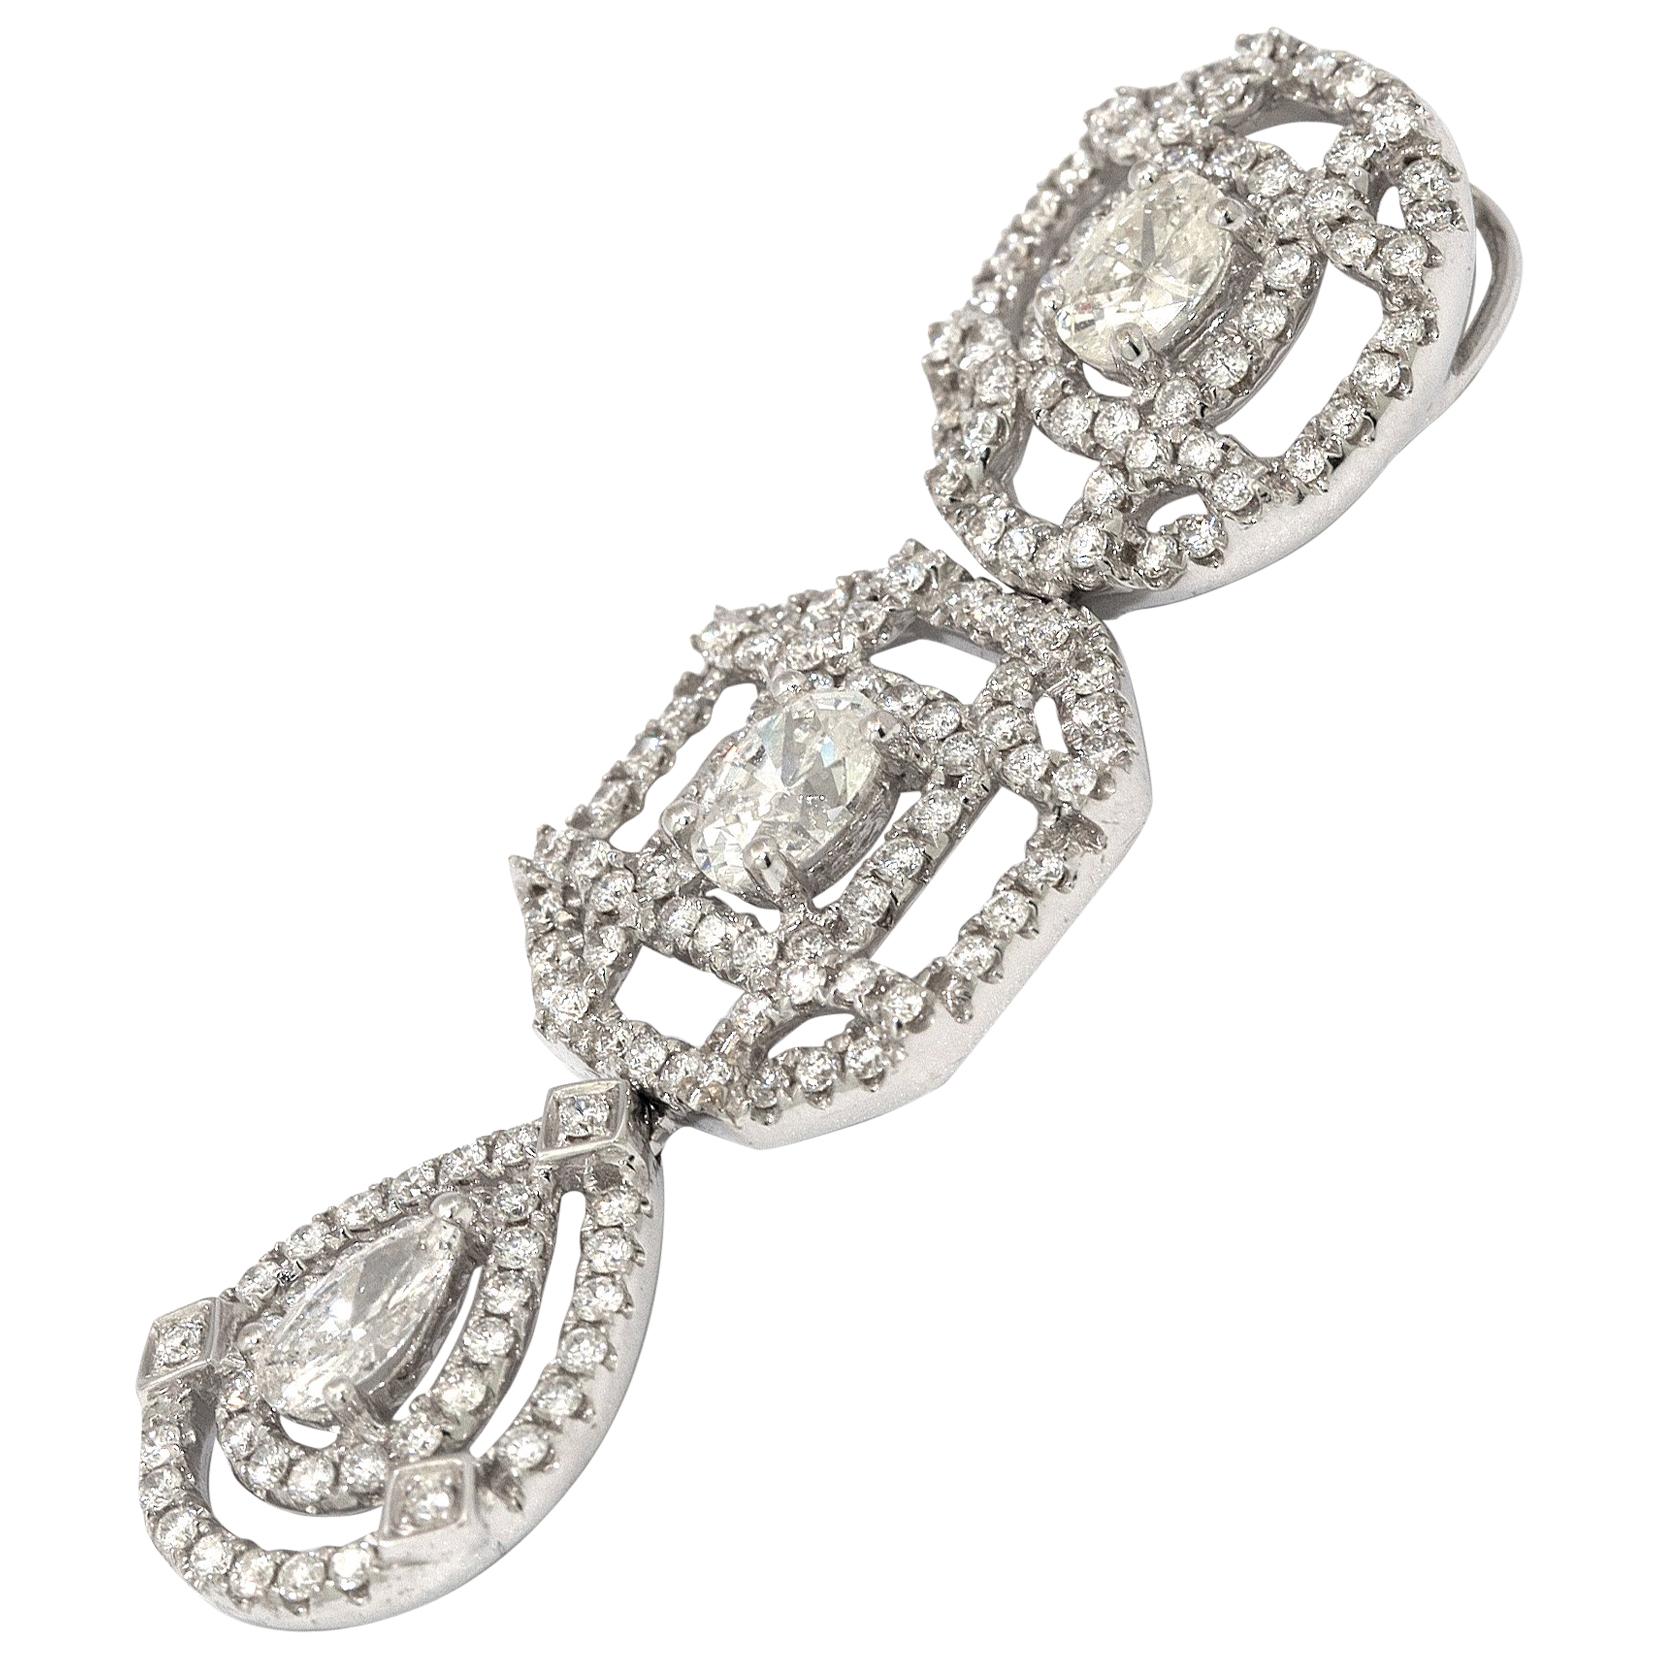 2.42 Carat Oval and Pear Shaped White Diamonds Pendant For Sale